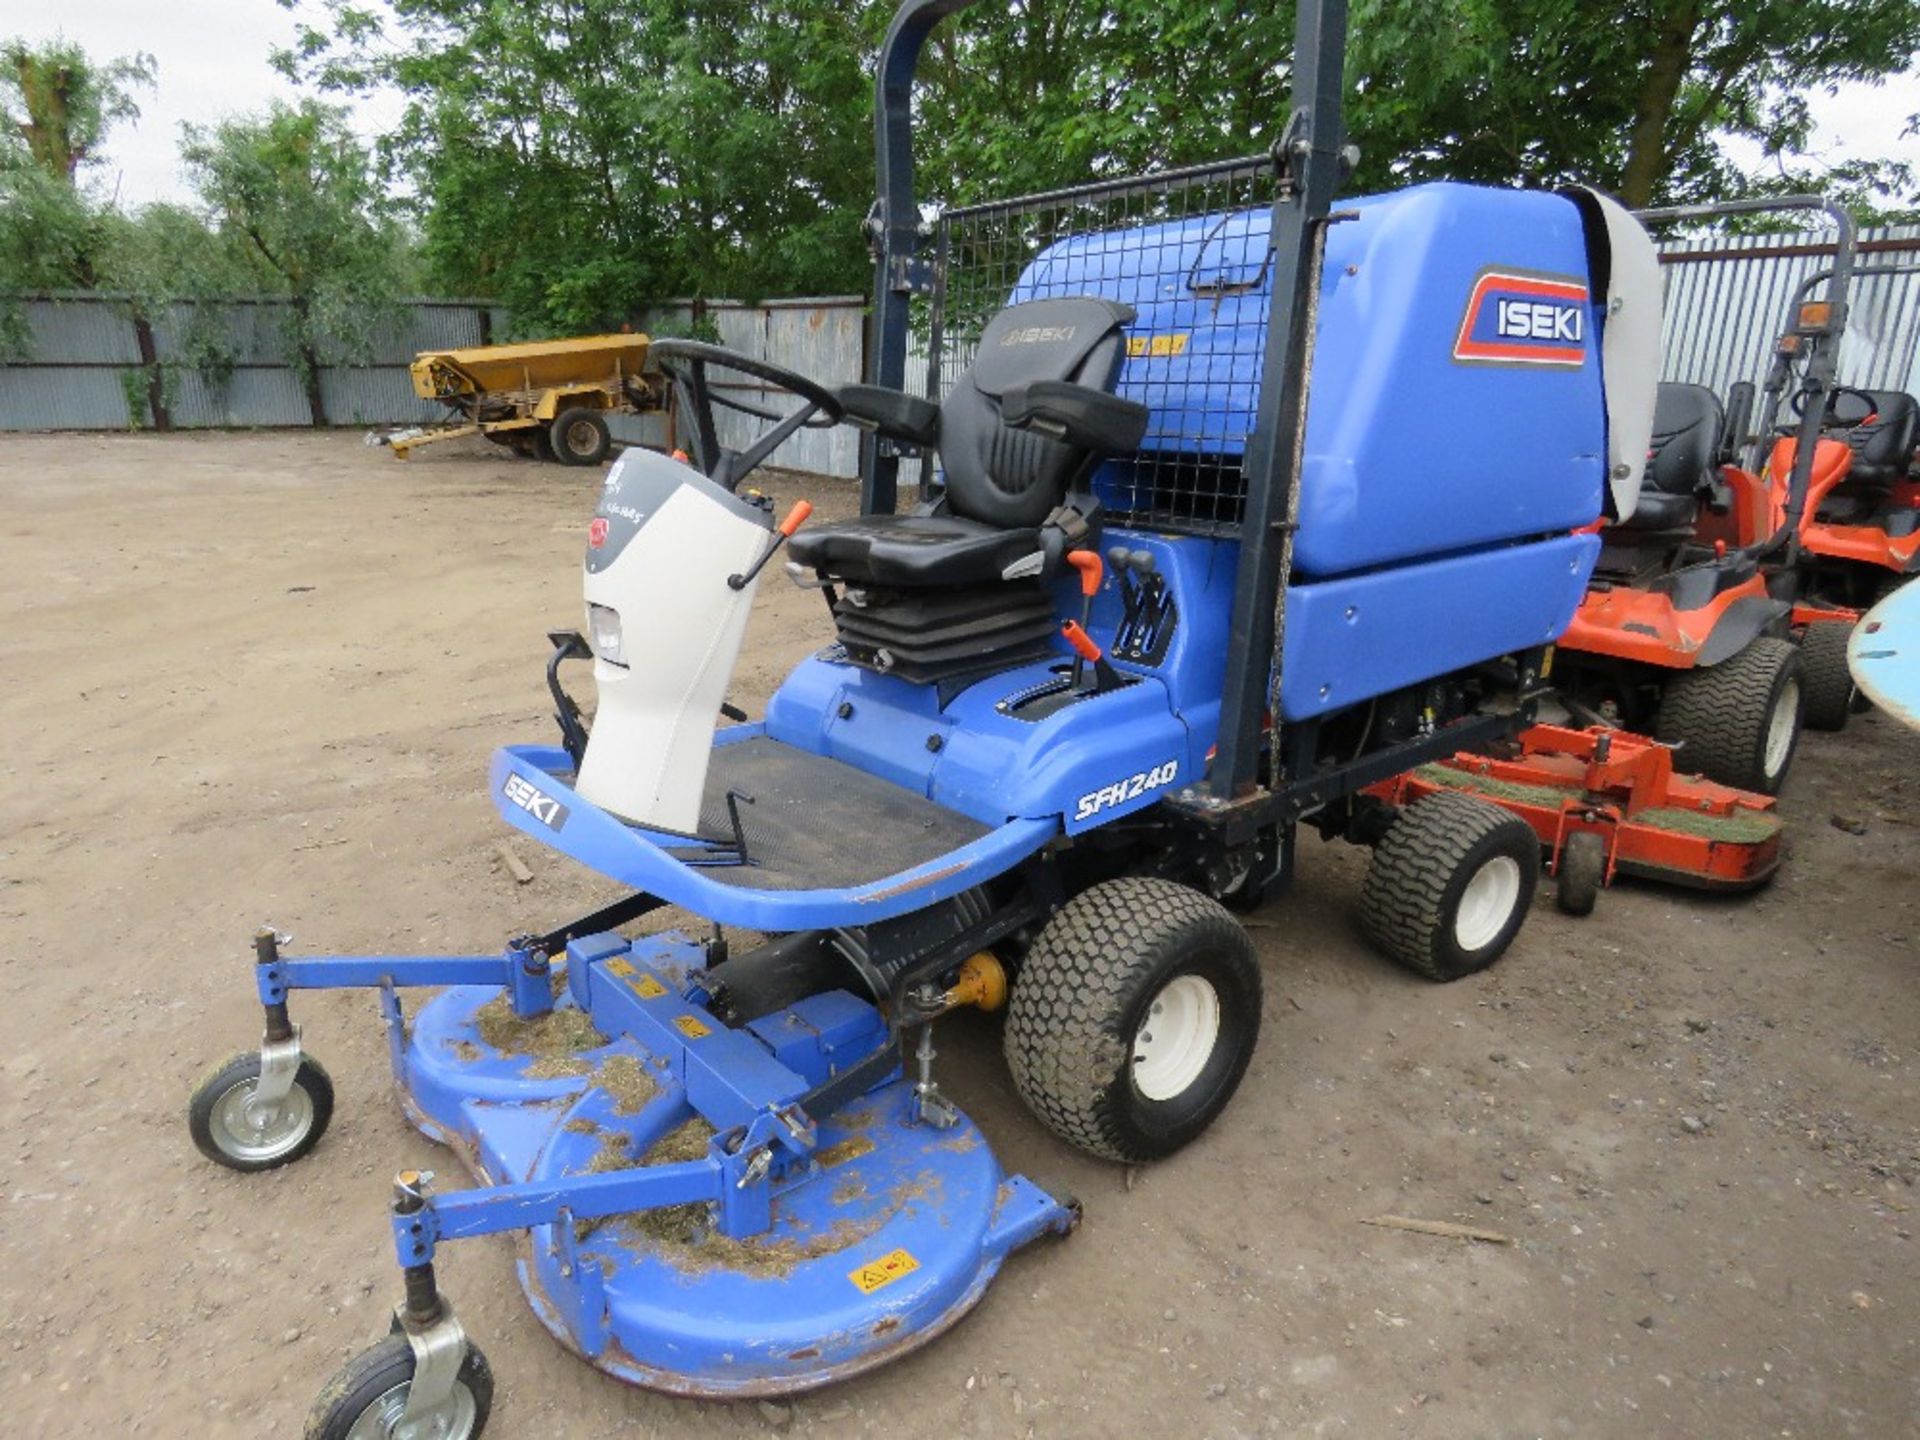 ISEKI SFH240 RIDE ON MOWER, YEAR 2014 BUILD, WITH REAR HIGH DISCHARGE COLLECTOR, 1062 REC ORDED - Image 3 of 10